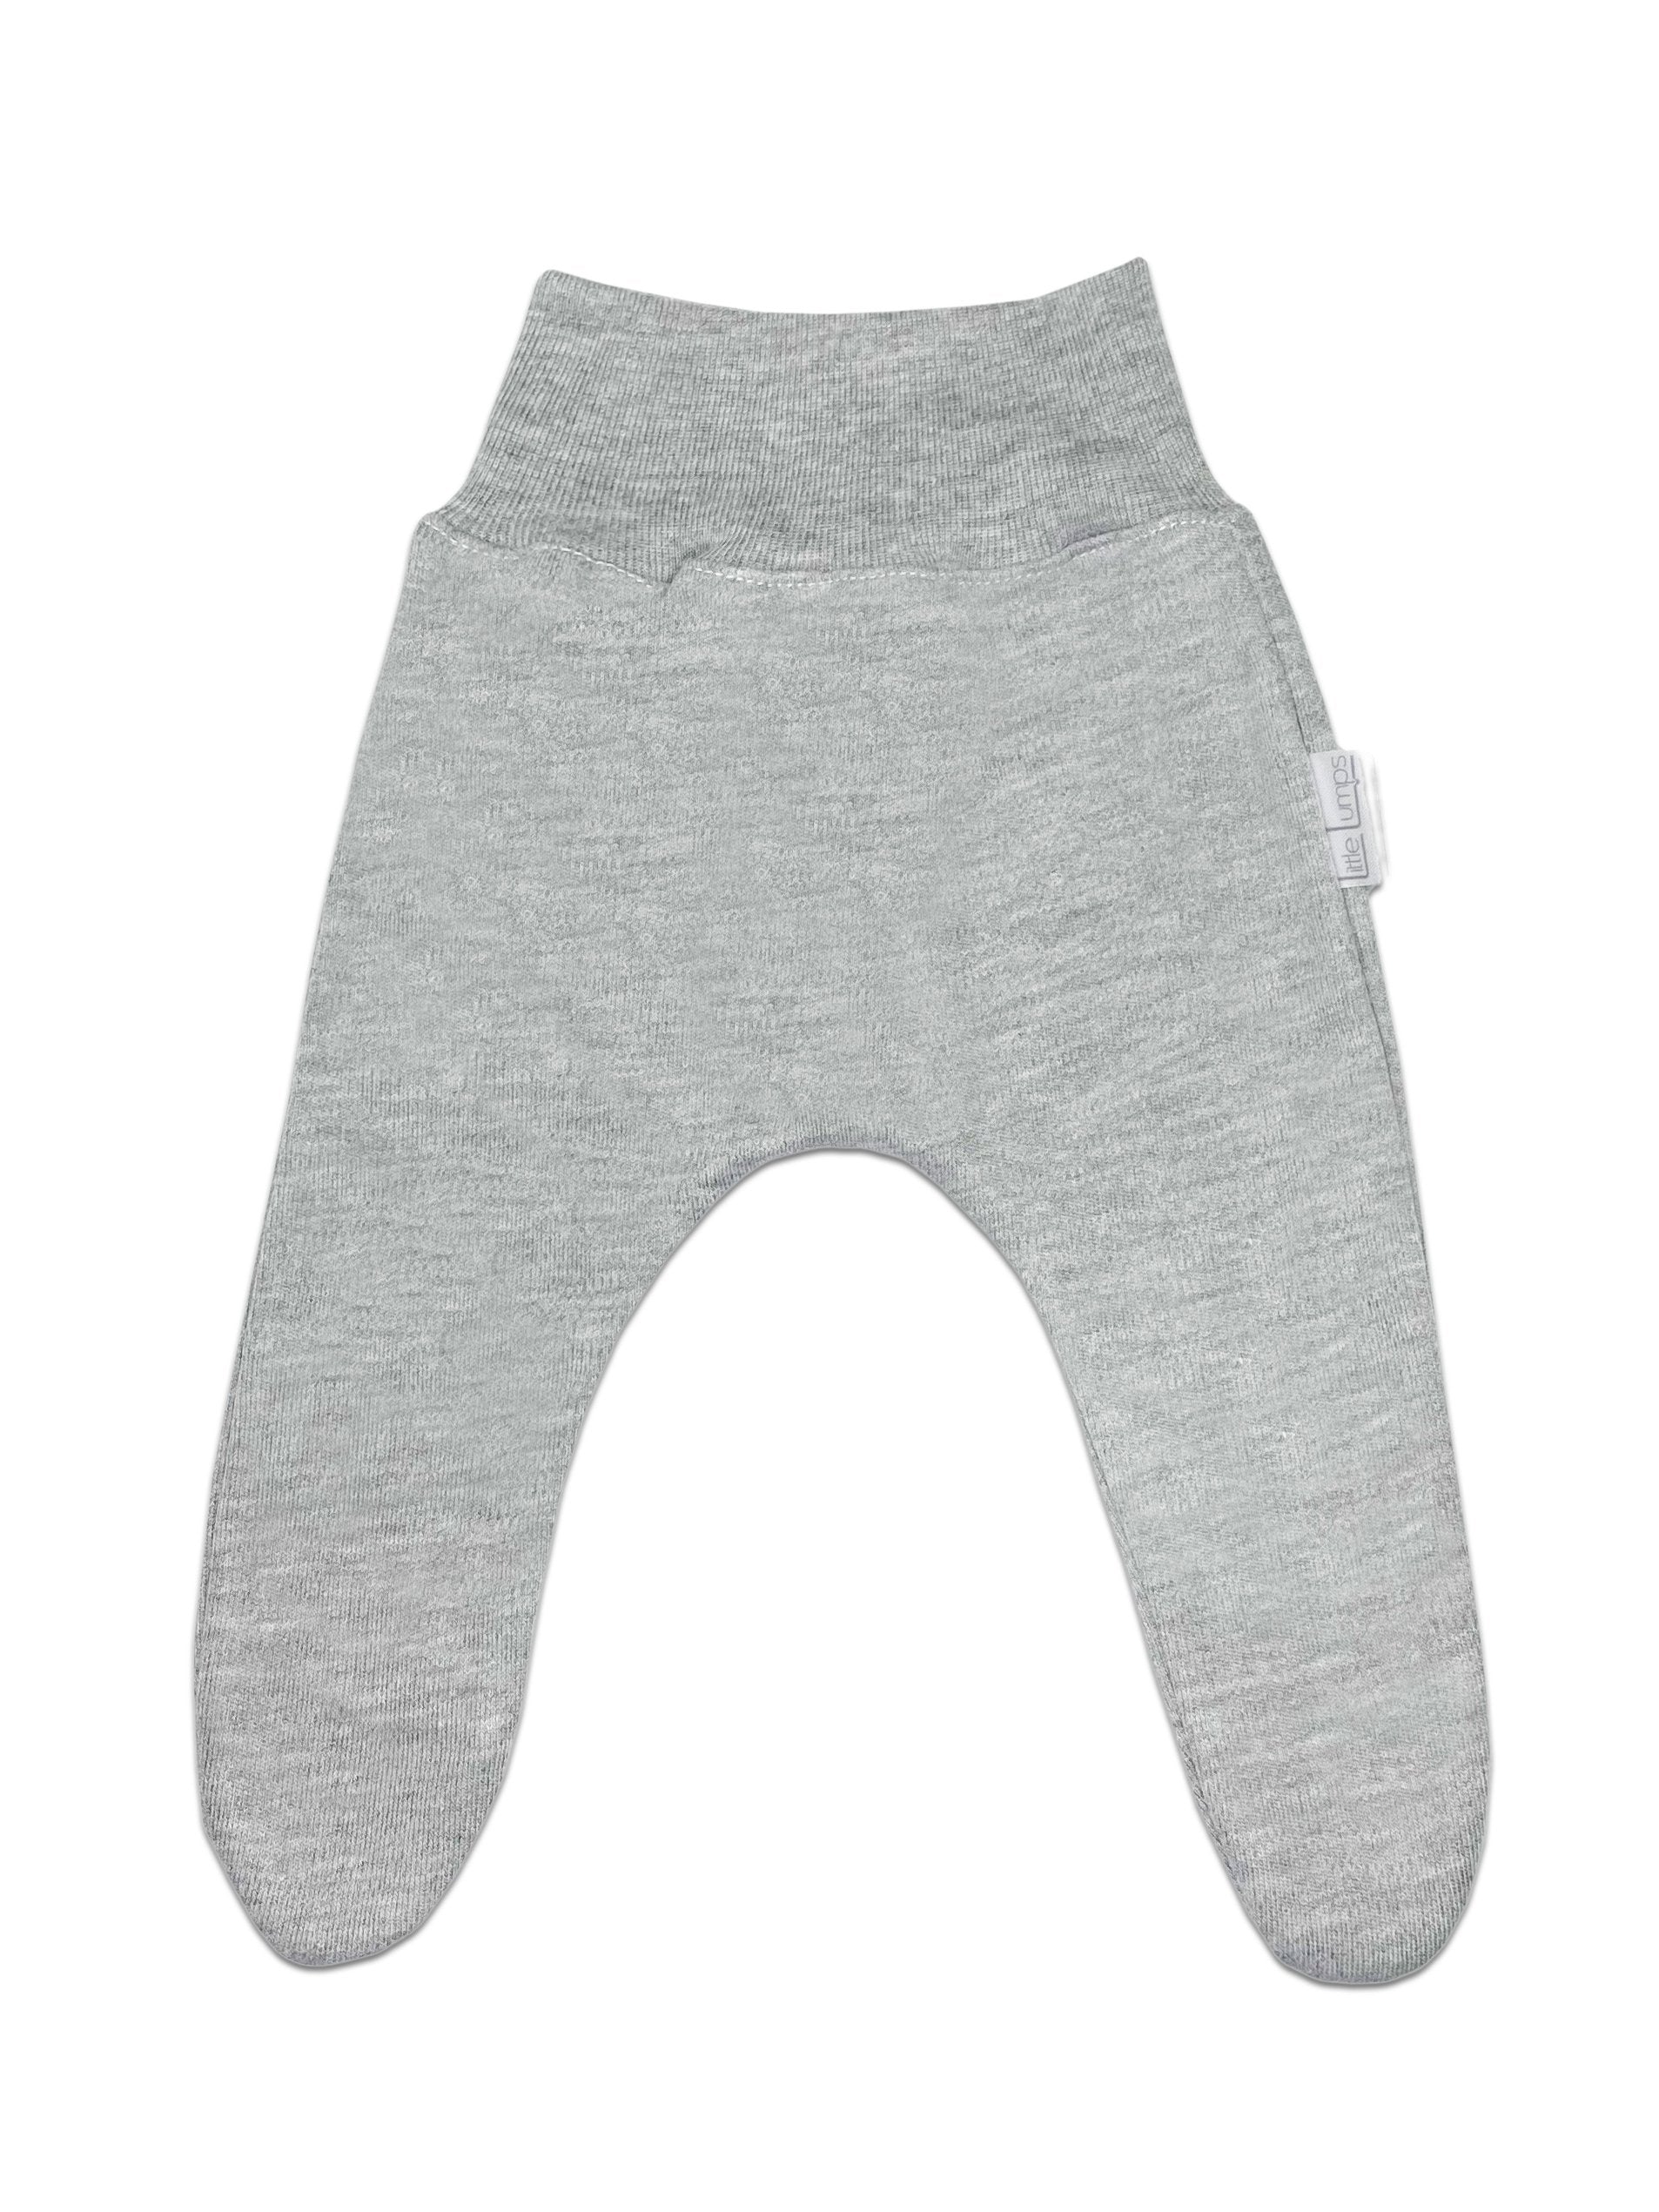 100% Cotton Footed Leggings - Grey - Trousers / Leggings - Little Lumps